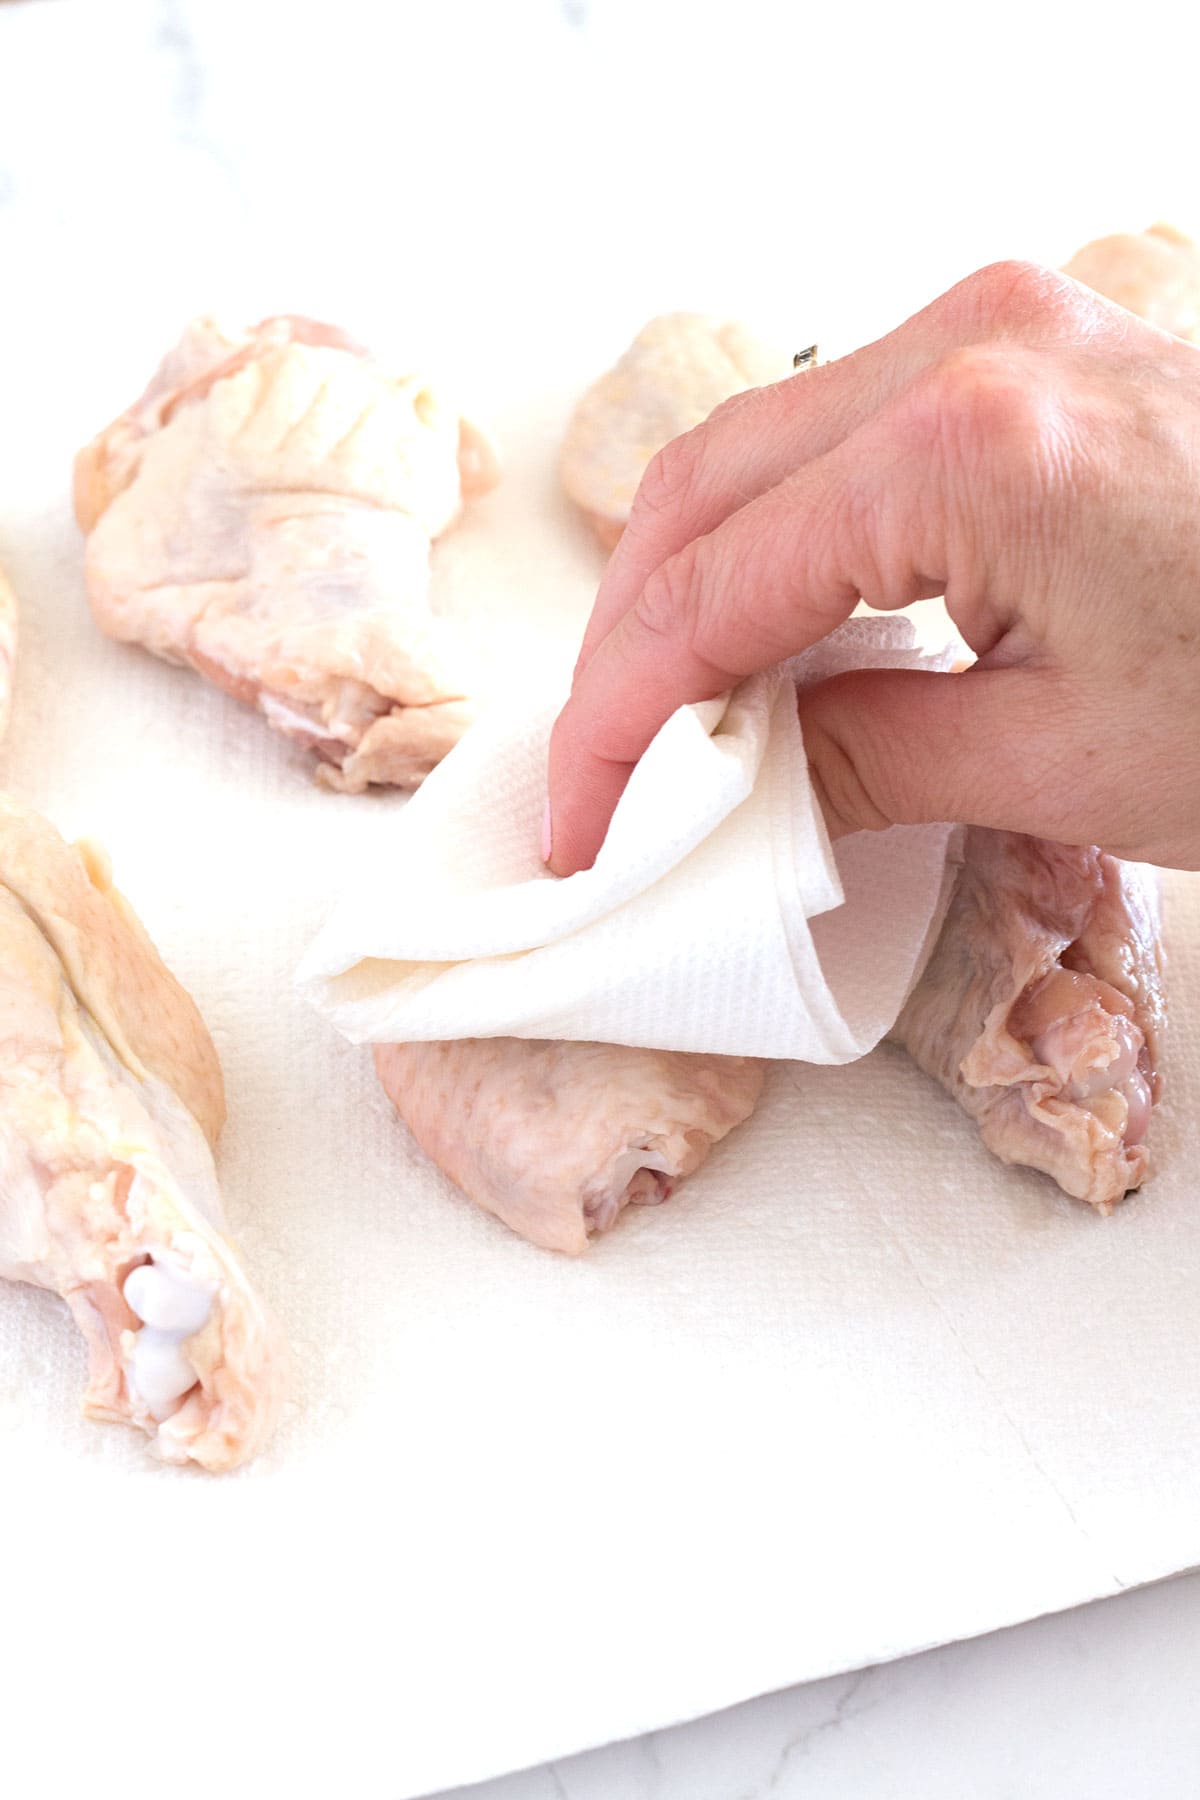 Hand thoroughly drying chicken wings with paper towels.